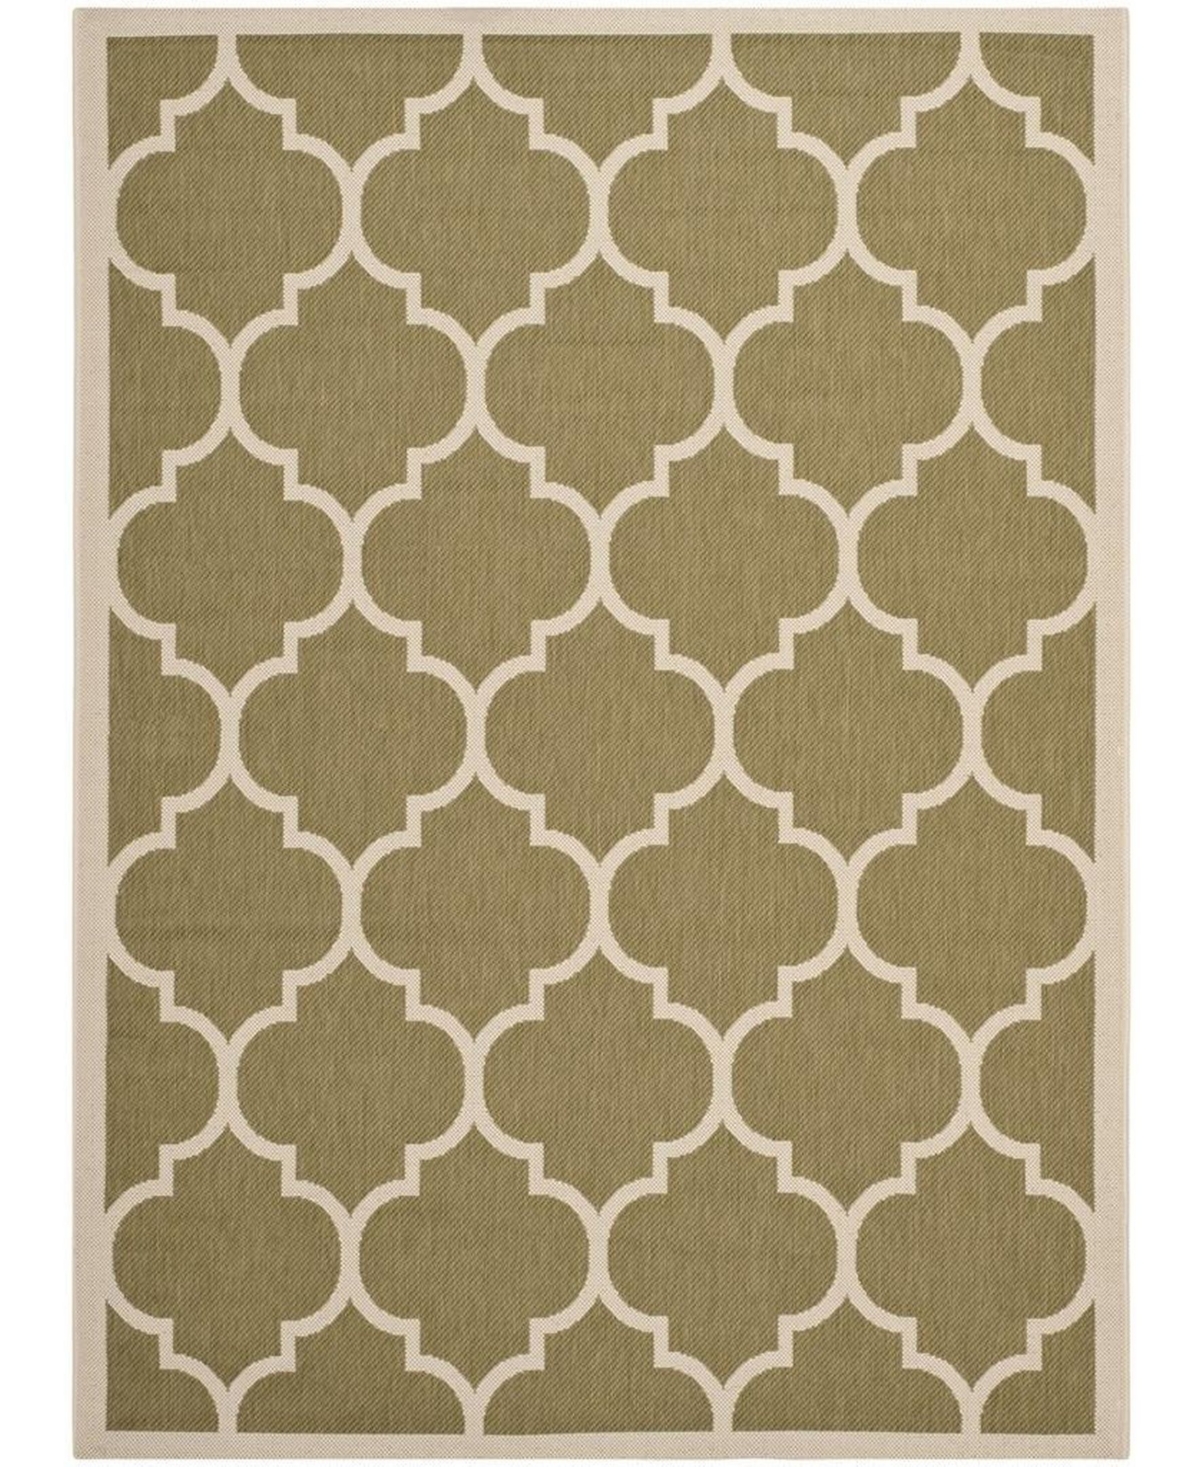 Safavieh Courtyard Cy6914 Green And Beige 4' X 5'7" Outdoor Area Rug